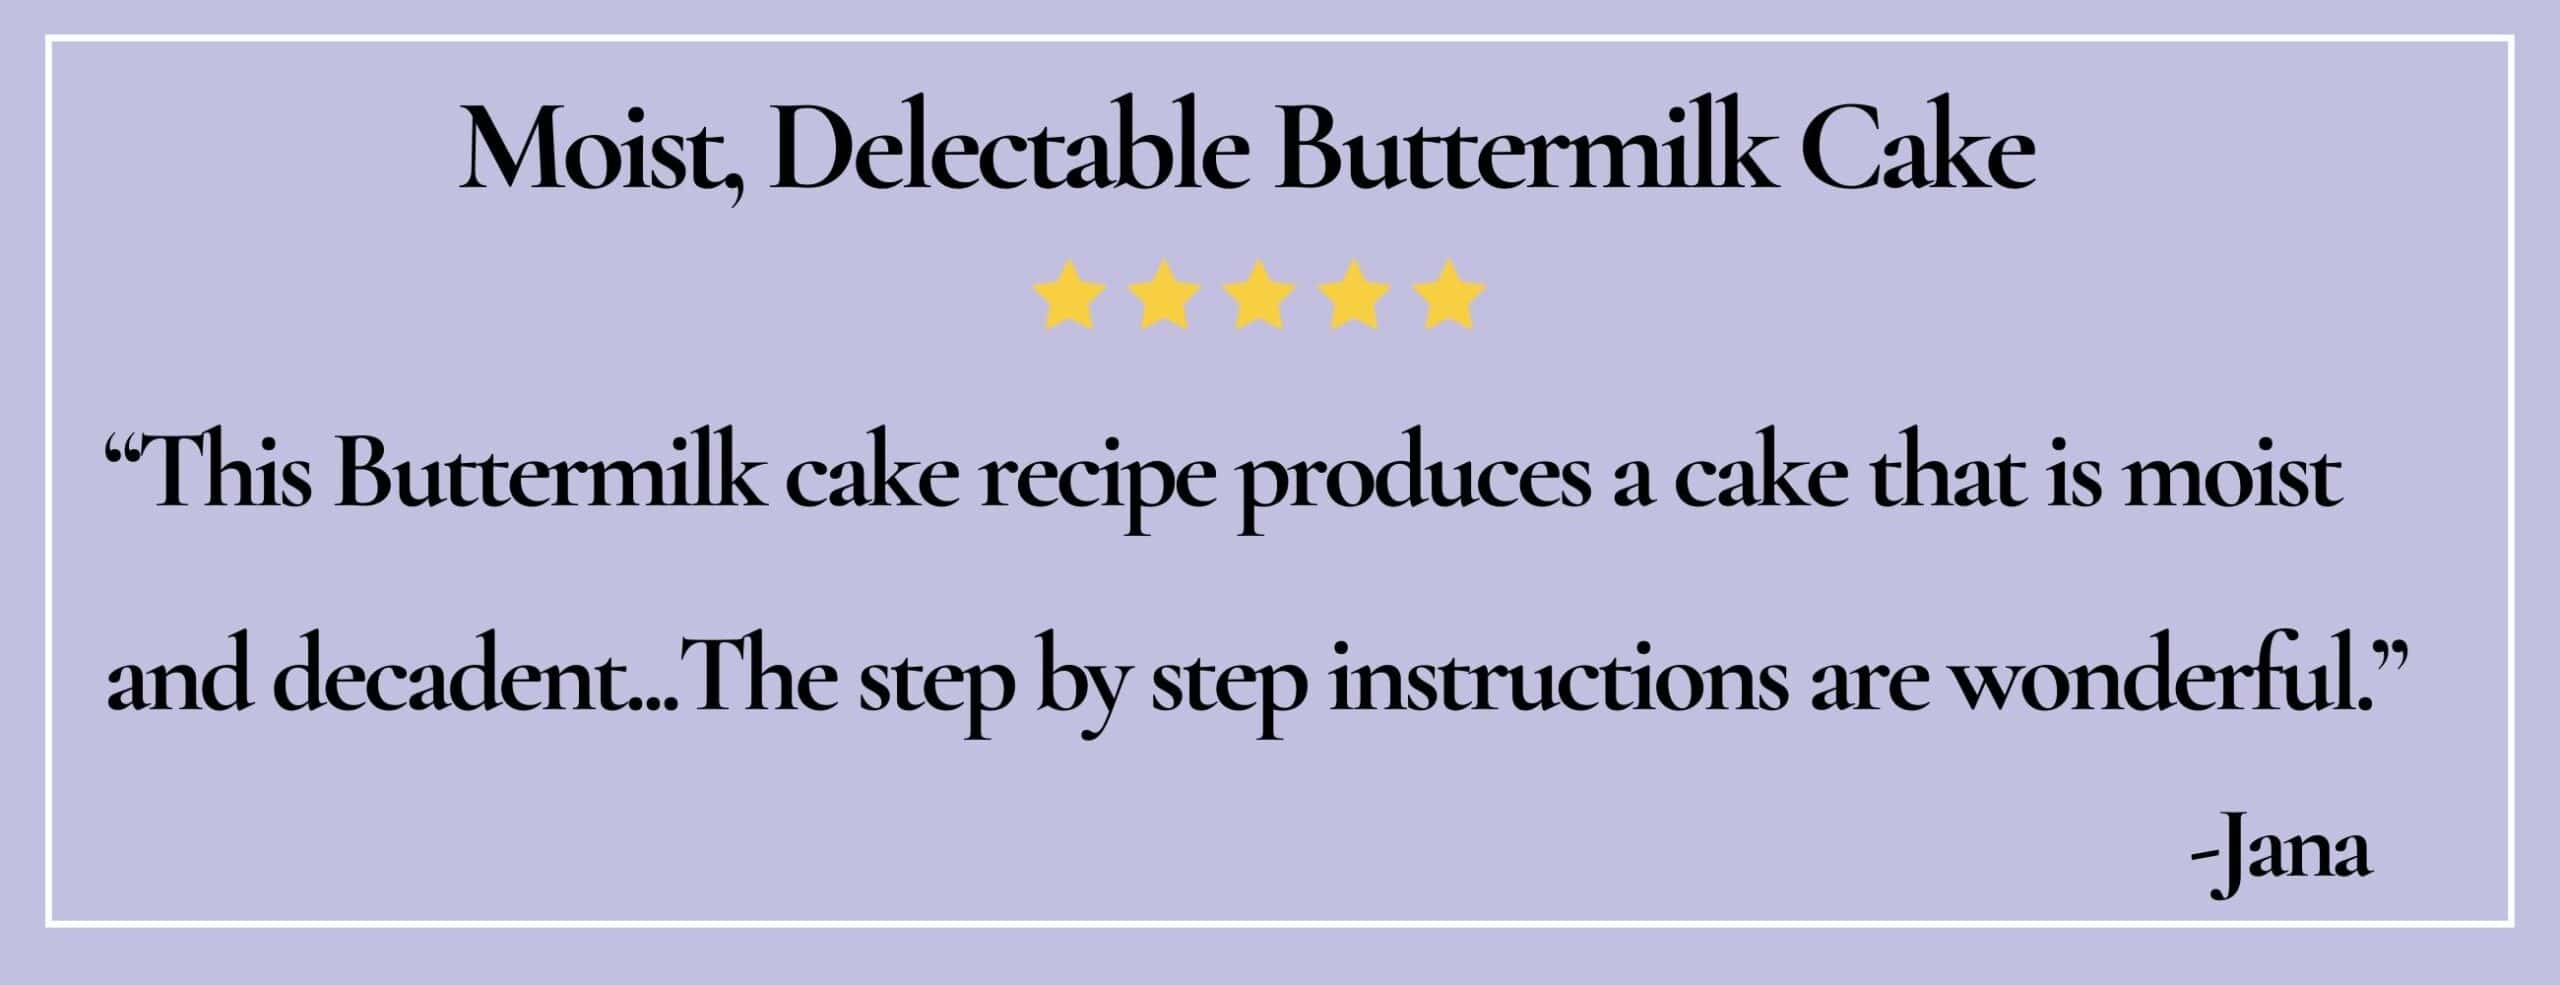 text box with paraphrase: This Buttermilk cake recipe produces a cake that is moist and decadent. -Jana